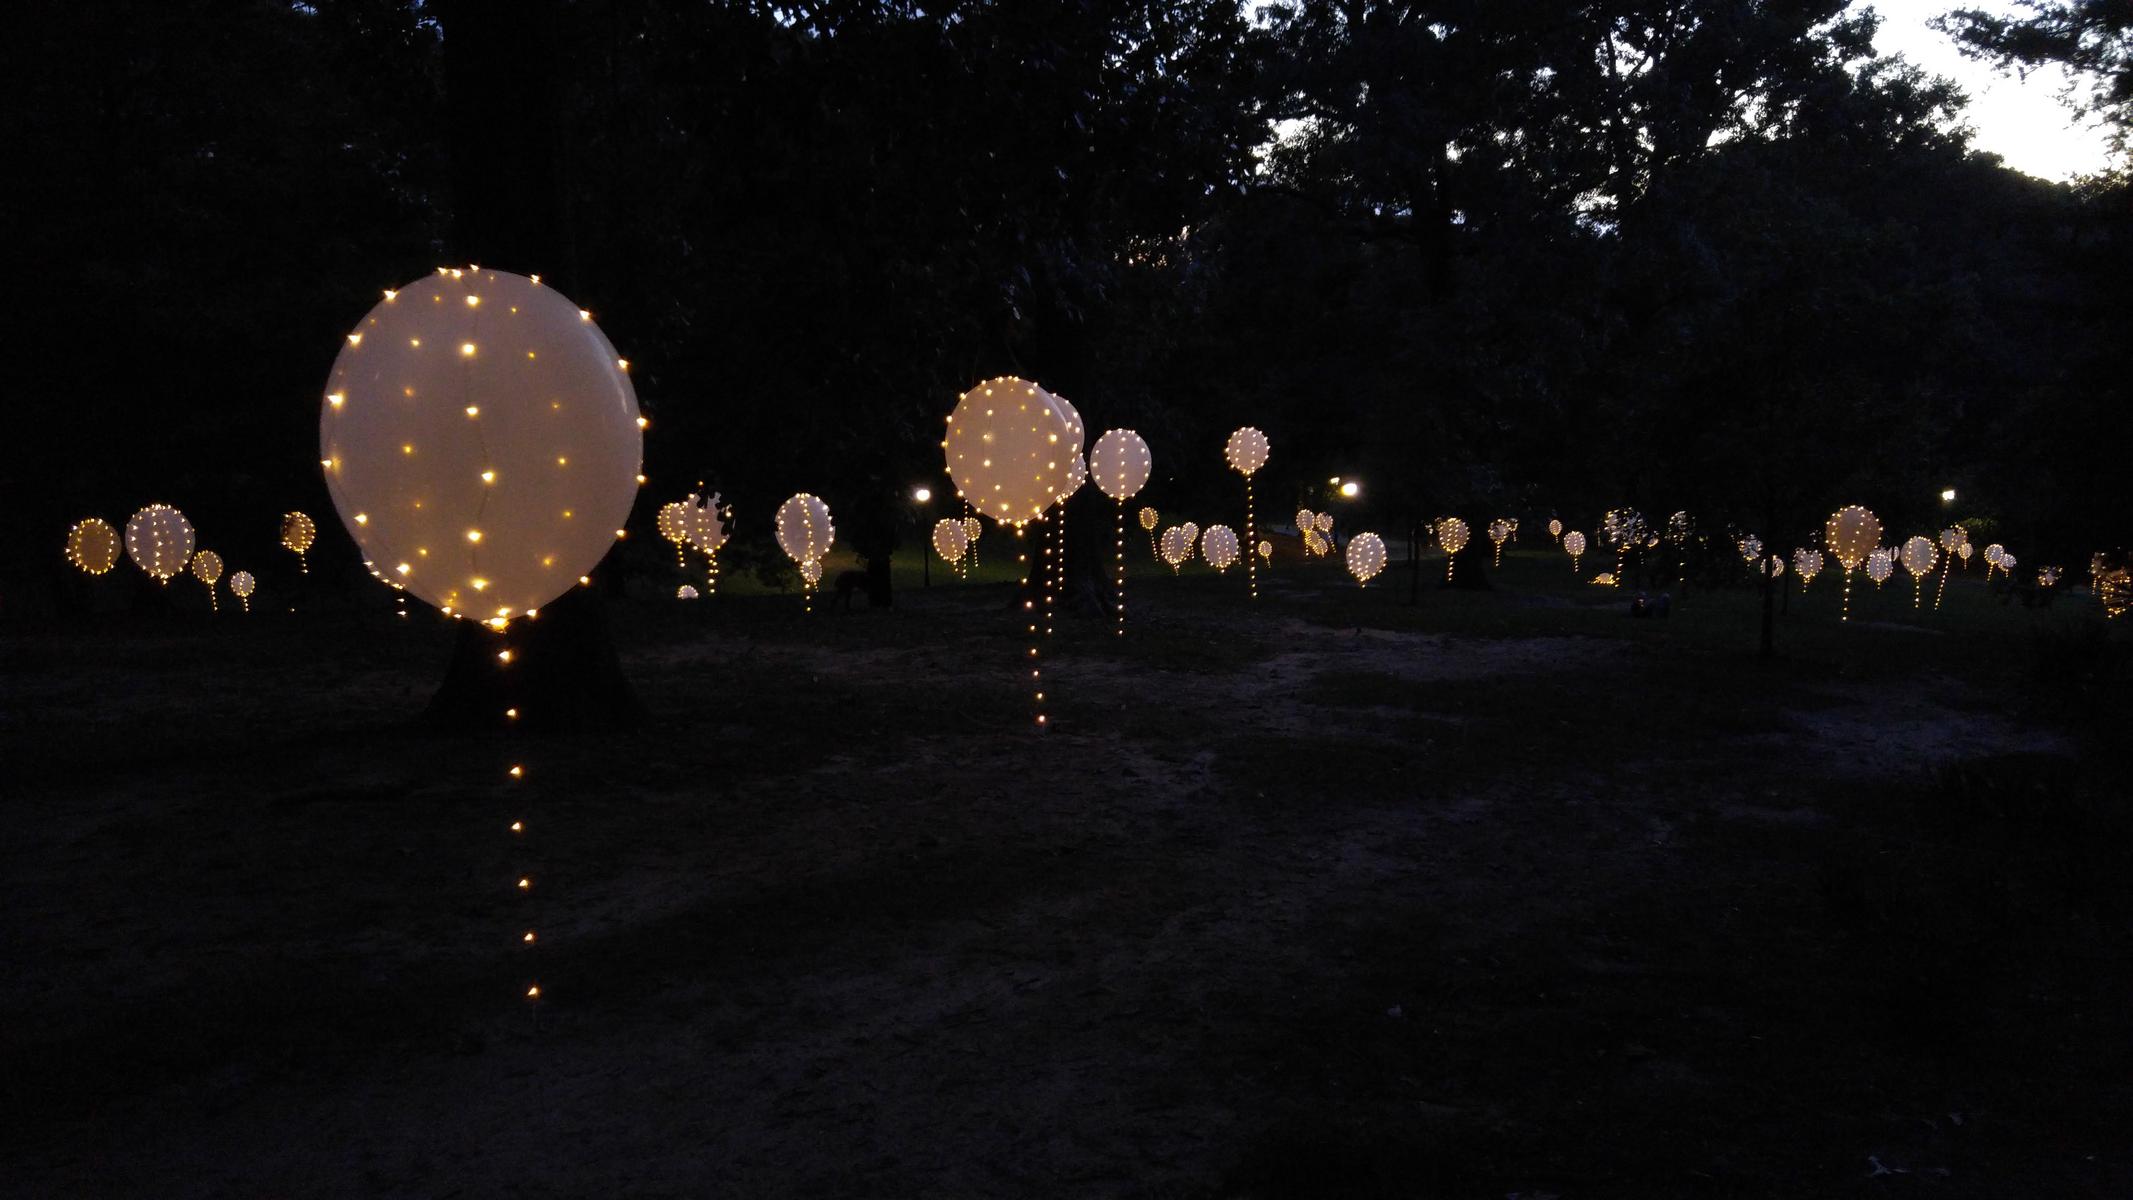 Photograph of a park hill at dusk with hundreds of large white balloons floating three feet above the ground, each surrounded by strands of tiny lights.